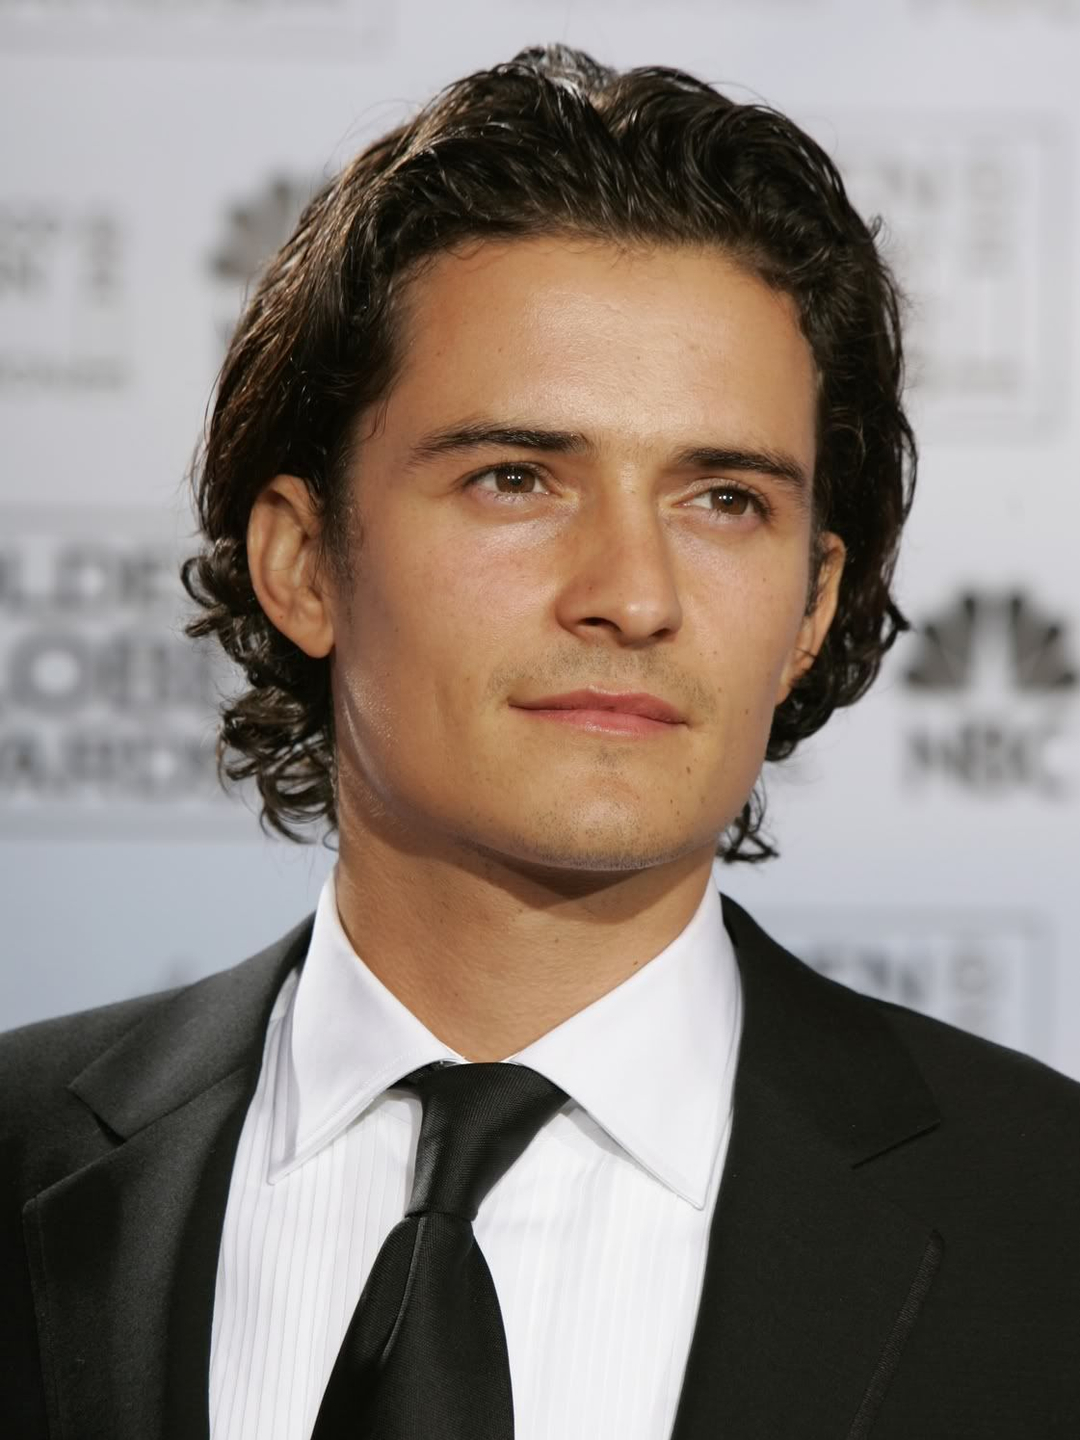 Orlando Bloom who are his parents